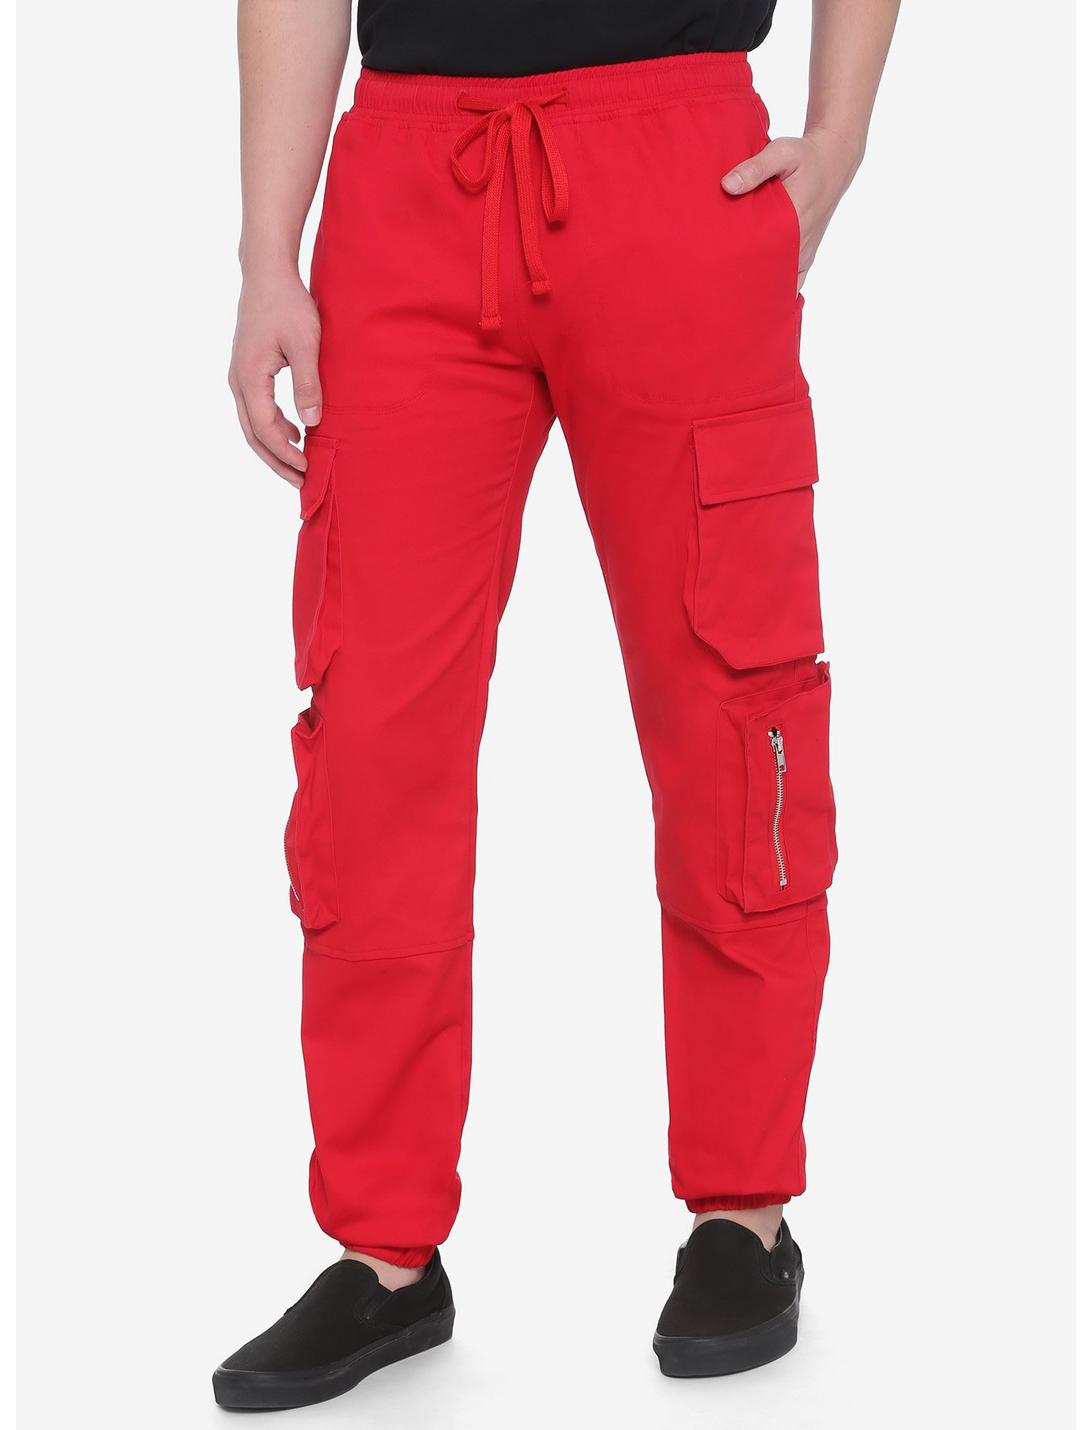 Red Jogger Cargo Pants, RED, hi-res